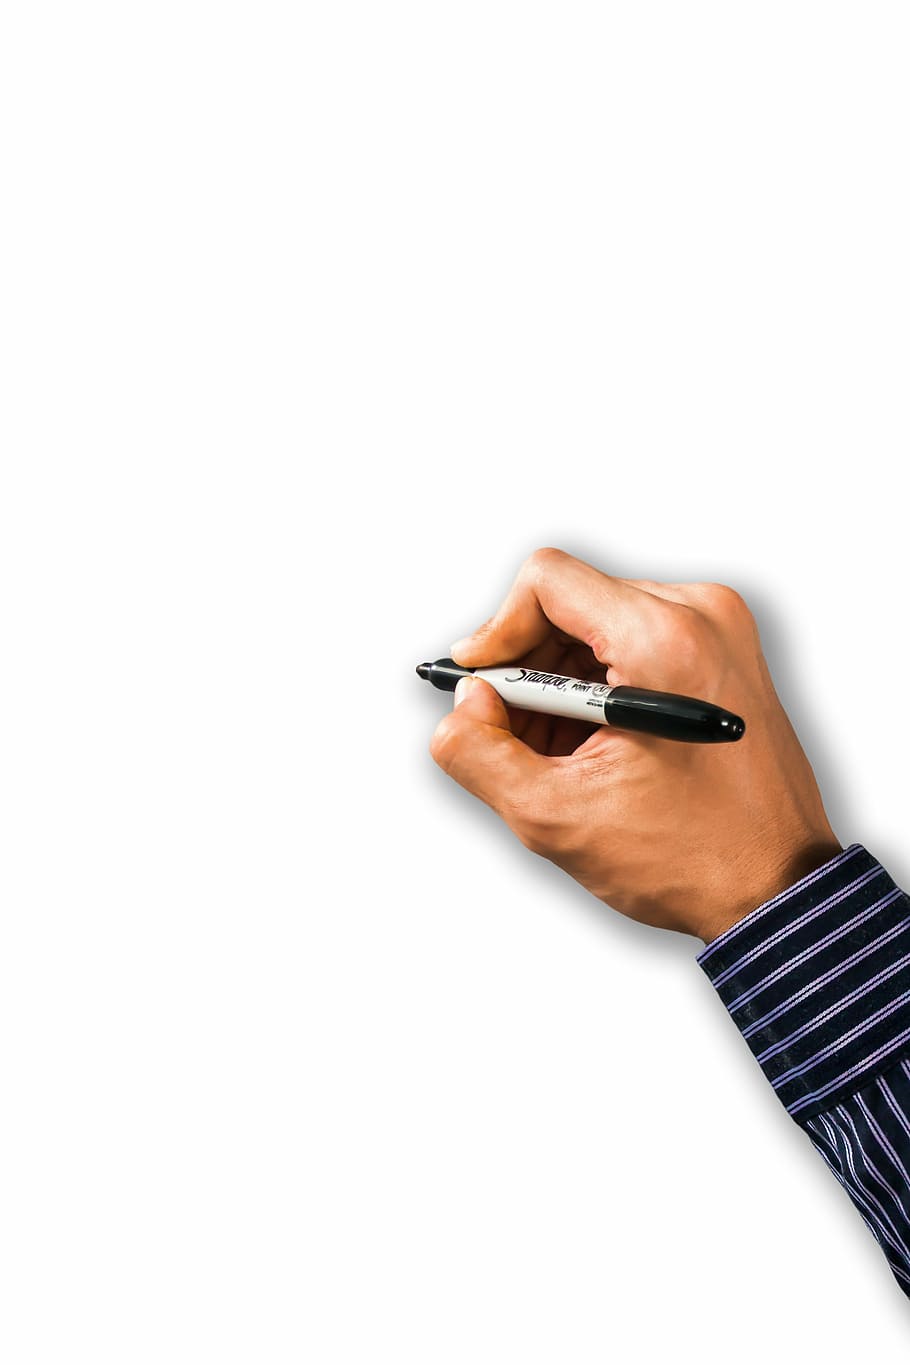 person, holding, marker, white, surface, psd, writing hand, write, writing, hand writing